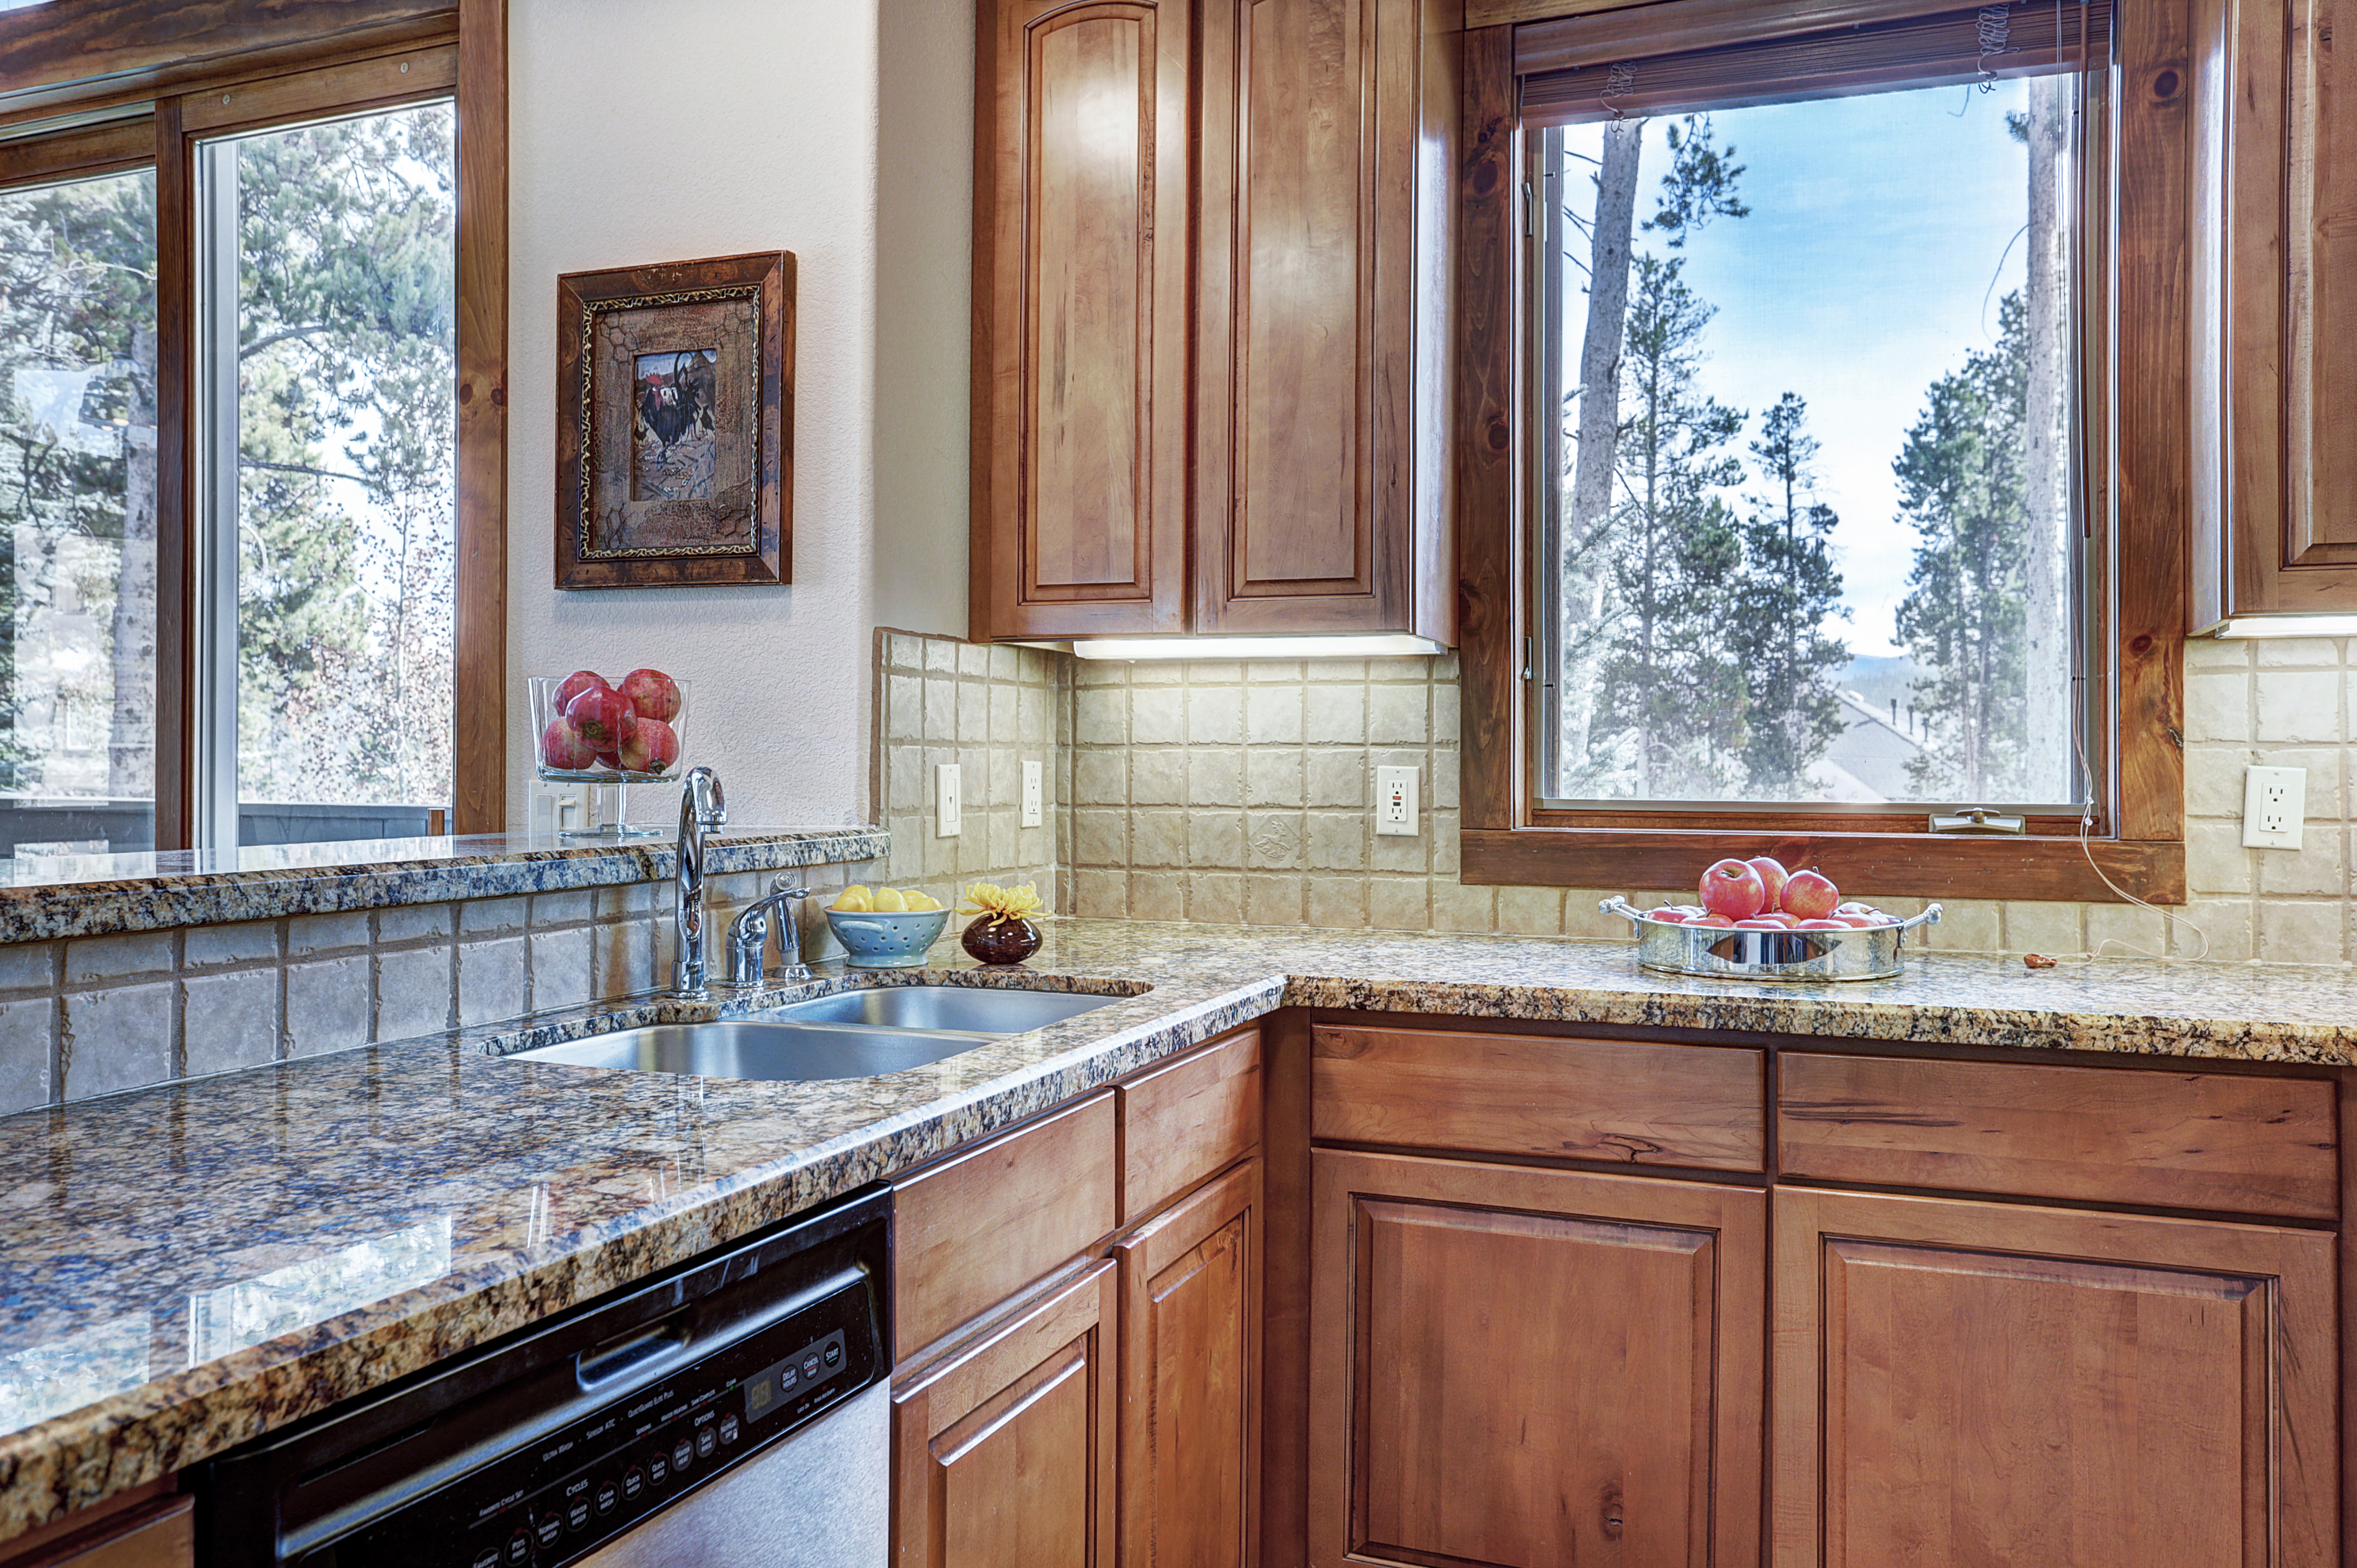 Enjoy the beautiful views right outside the kitchen - Amber Sky Breckenridge Vacation Rental